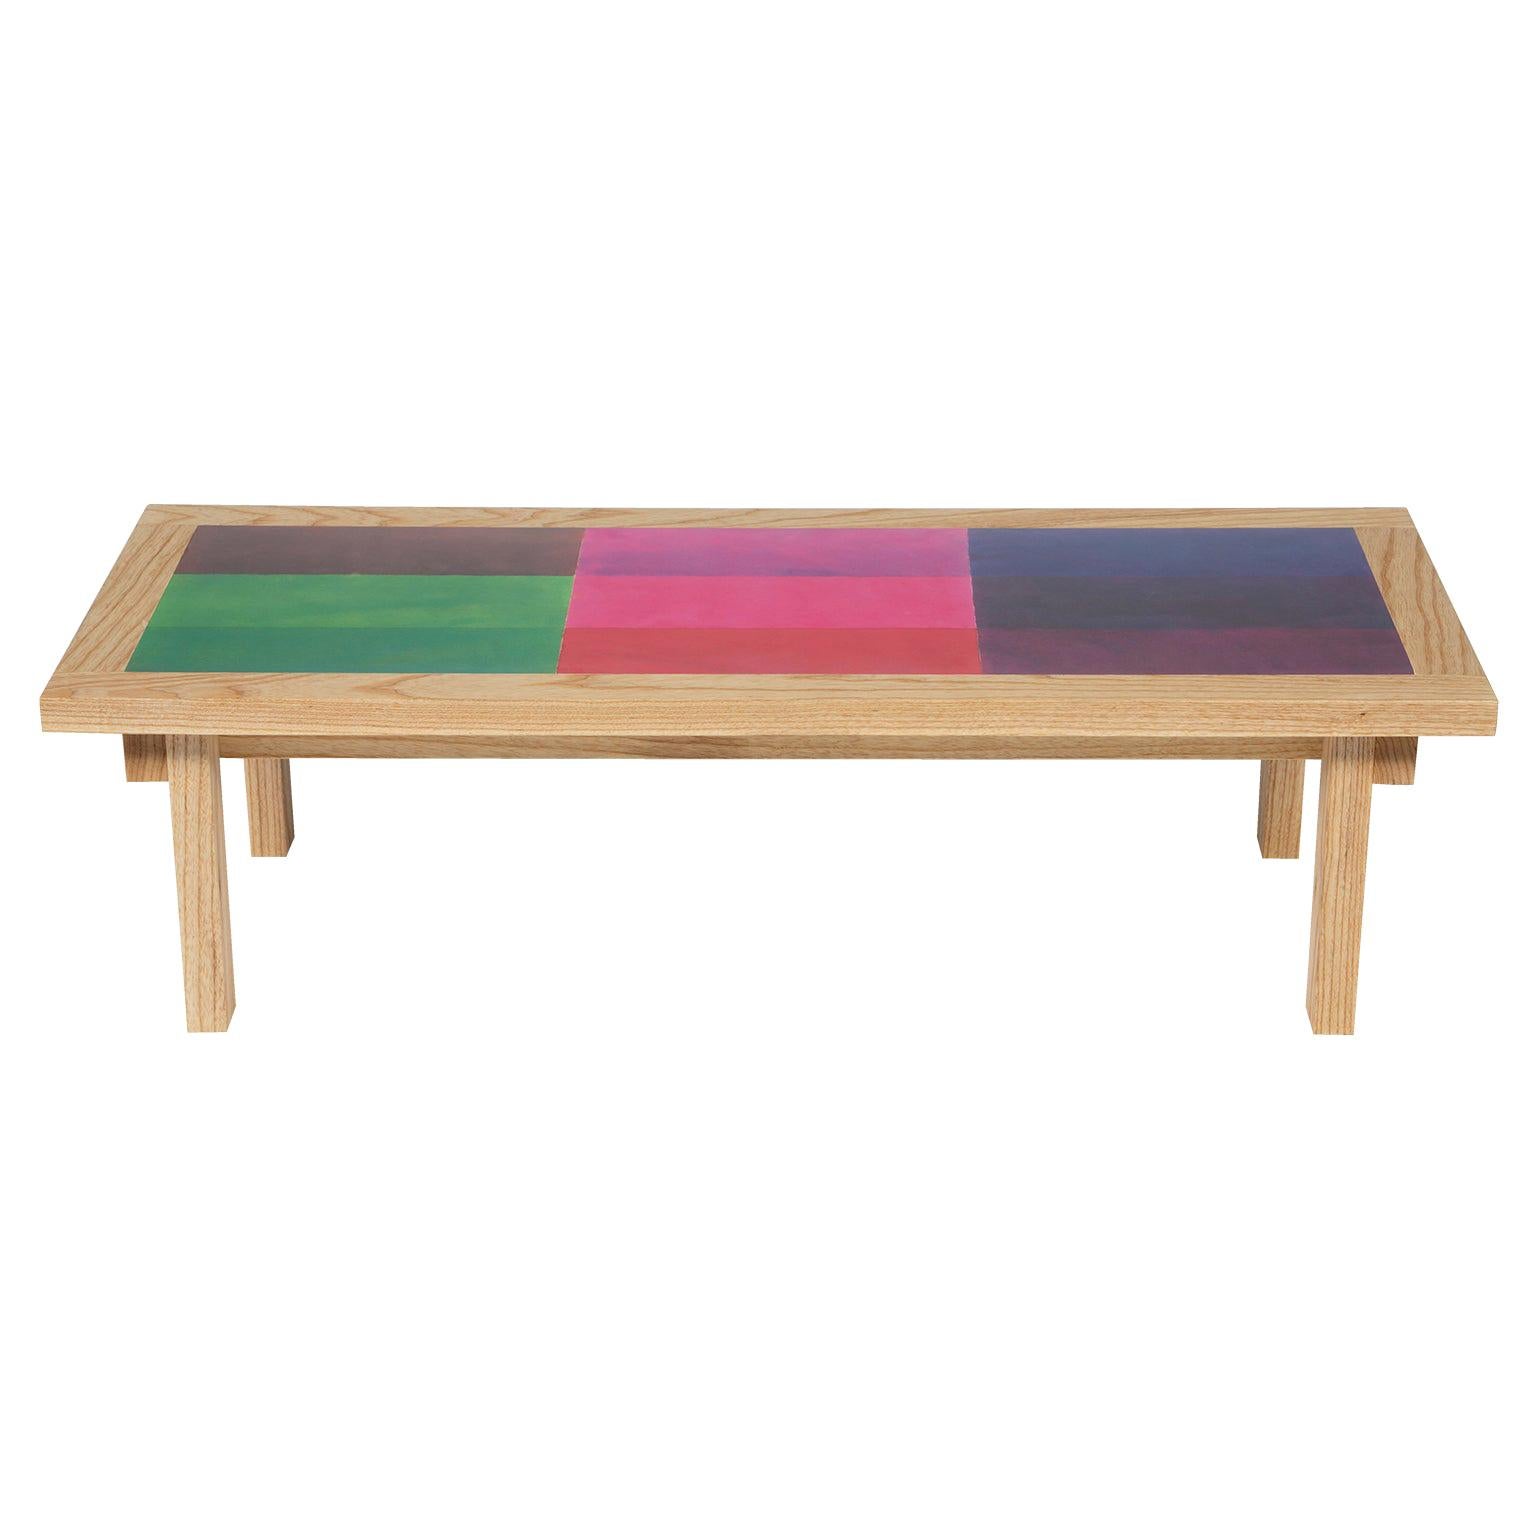 Nine Colored Blocks Table by DANAD Design 'Robyn Denny' For Sale